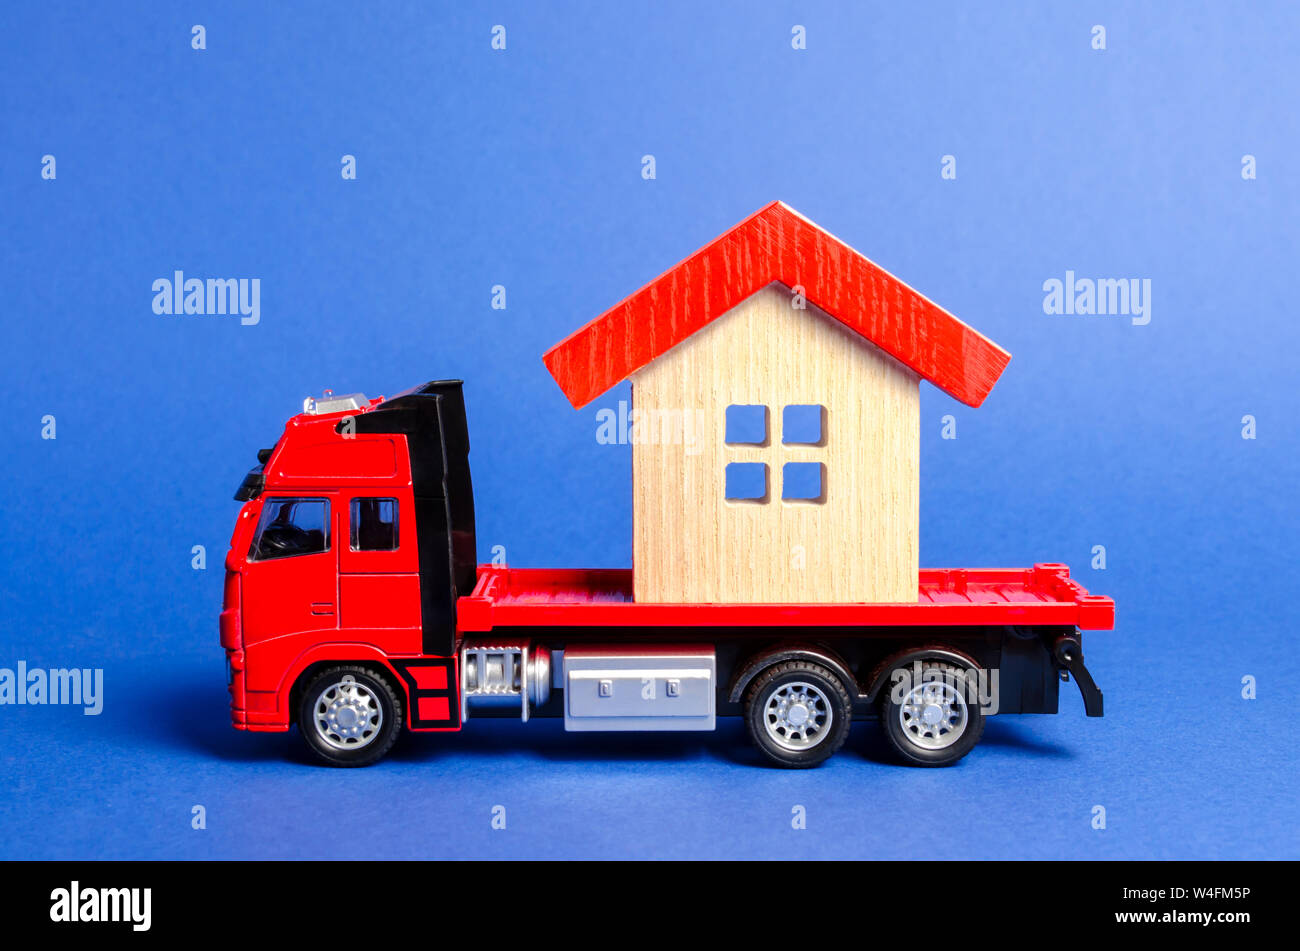 Red truck transports a red roofed house. Concept of transportation and cargo shipping, moving company. Construction of new houses and objects. Industr Stock Photo